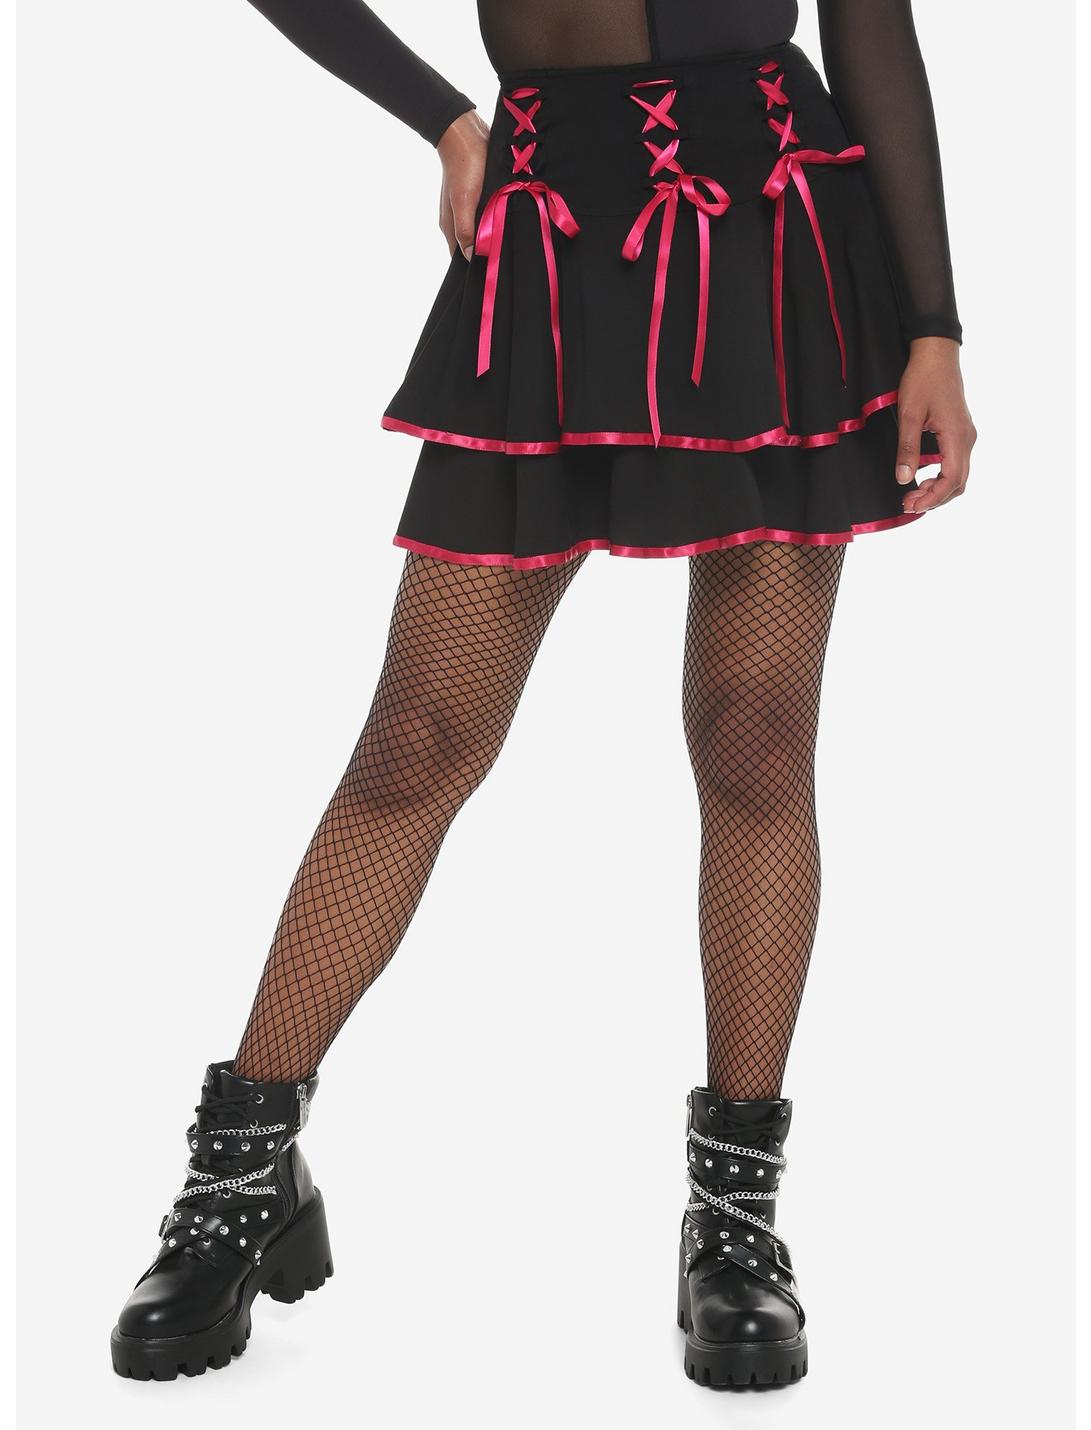 Black & Pink Lace-Up Tiered Skirt, PINK, hi-res